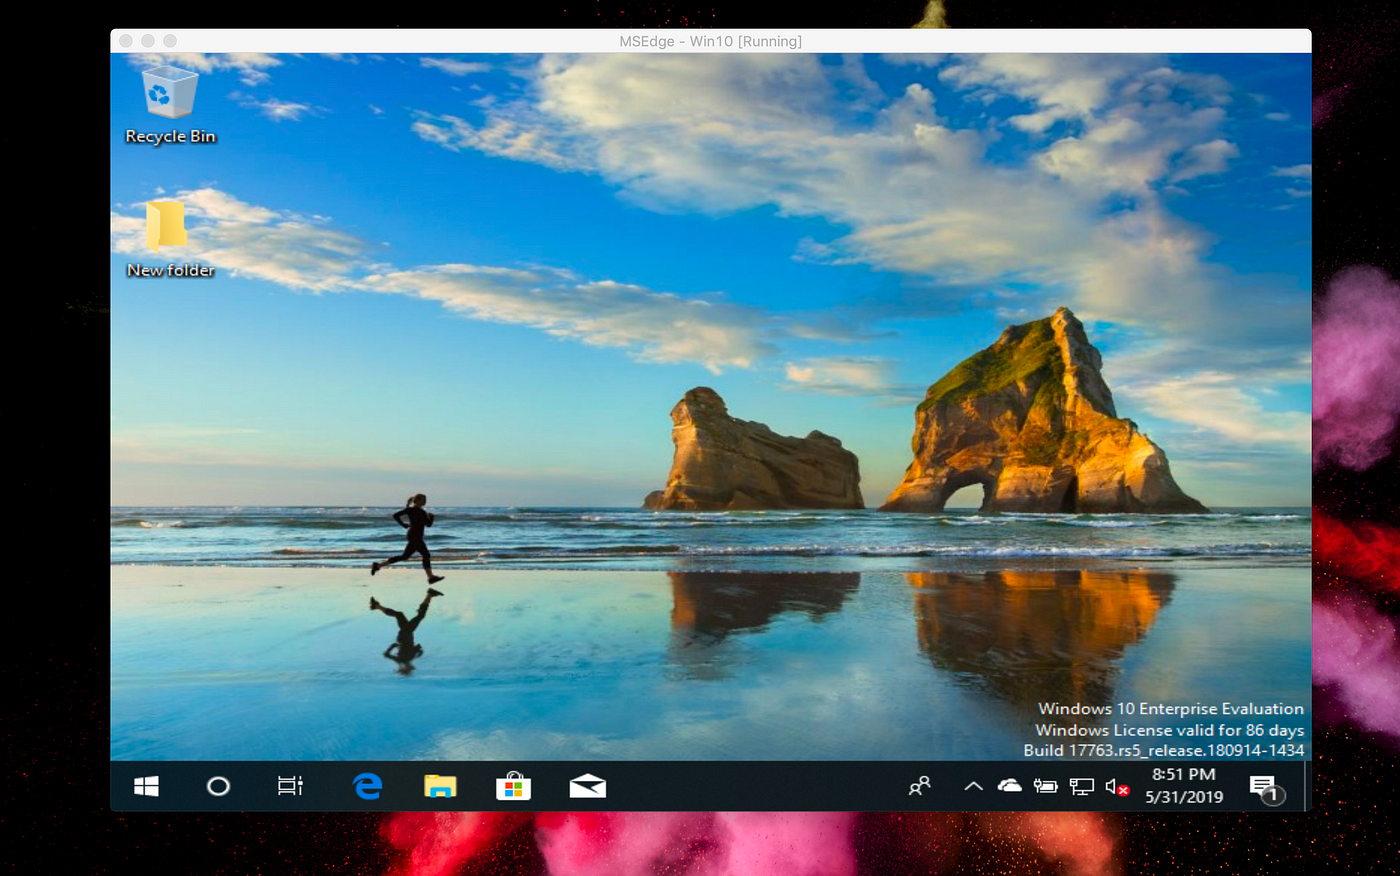 How to Install a Totally Free Windows 10 OS on Your Mac for Fun and Profit  | by Anne Bonner | Towards Data Science